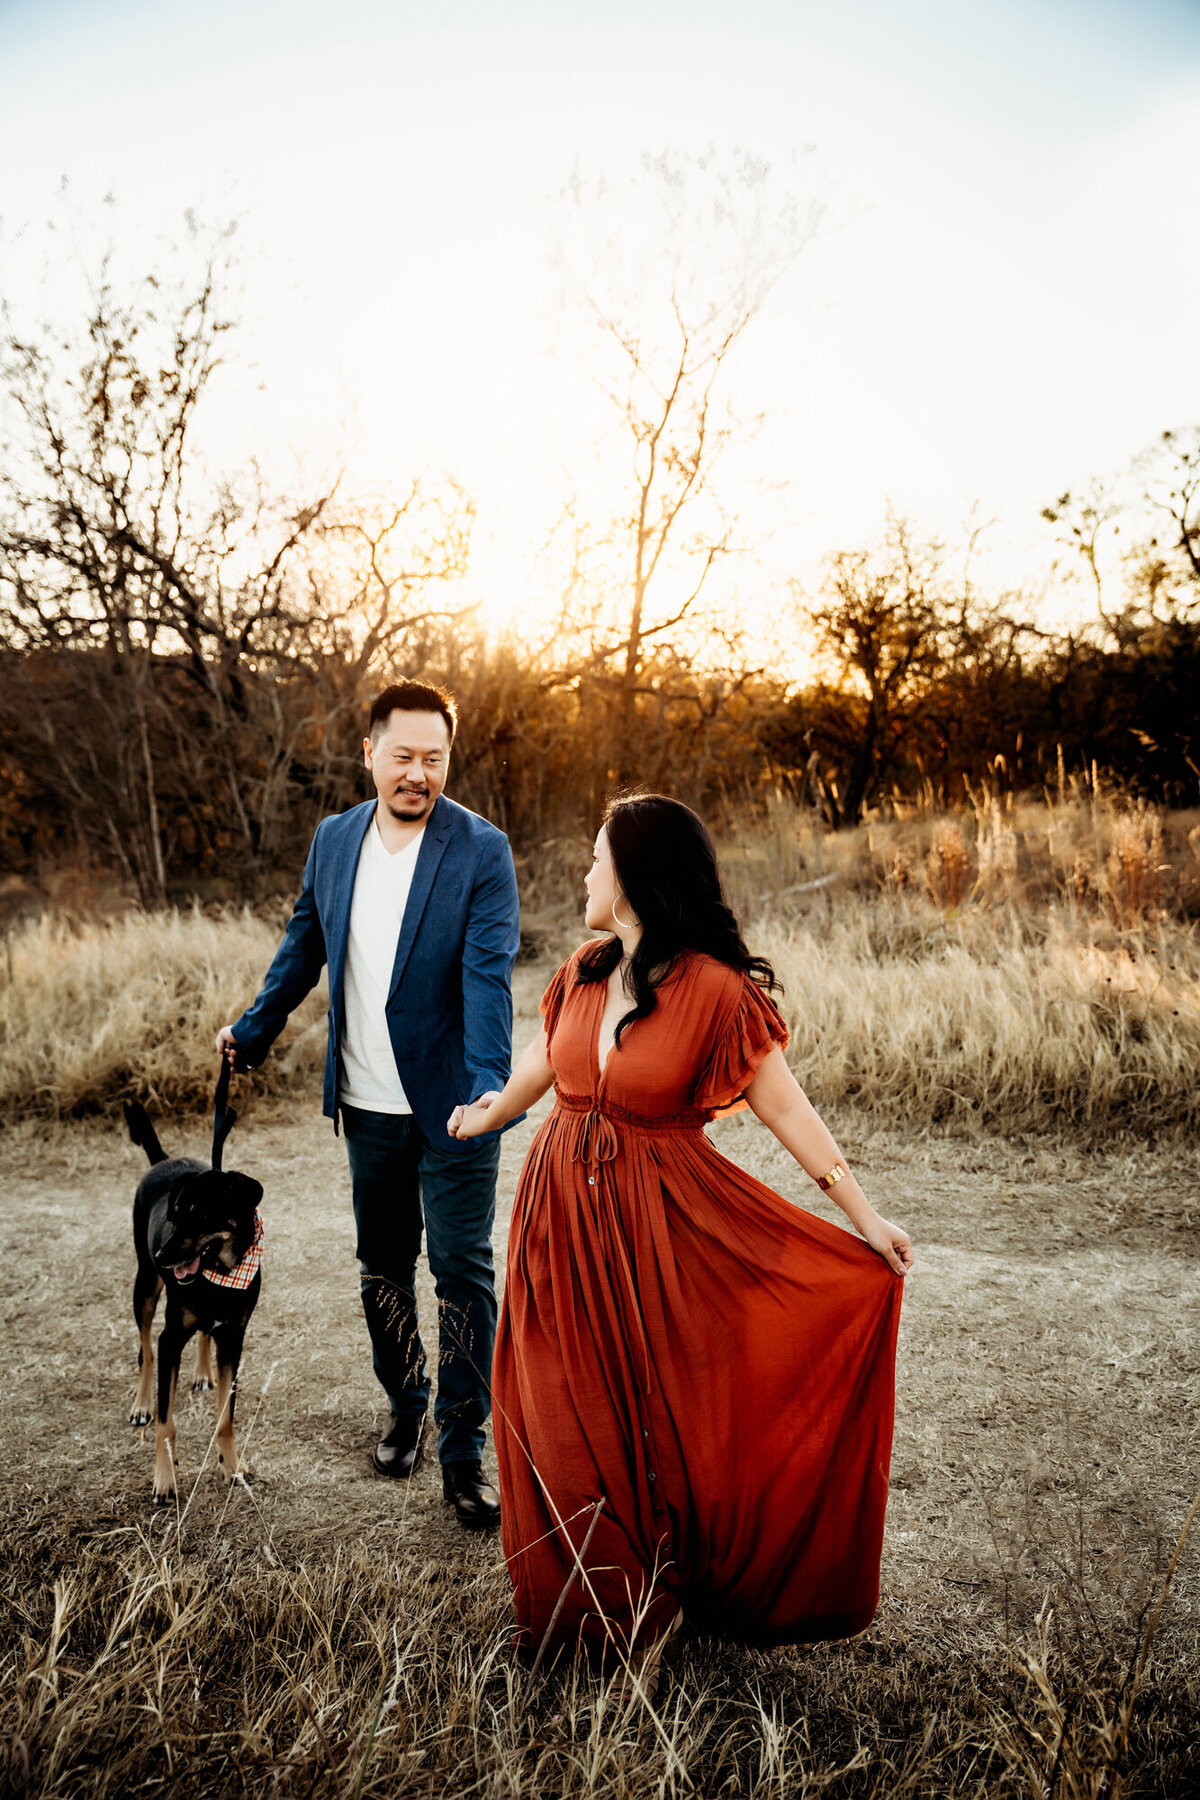 Couples Photographer,  Woman in a rust colored dress walking in a field holding hands with a man in a blue blazer who is walking a dog. This is at sunset.